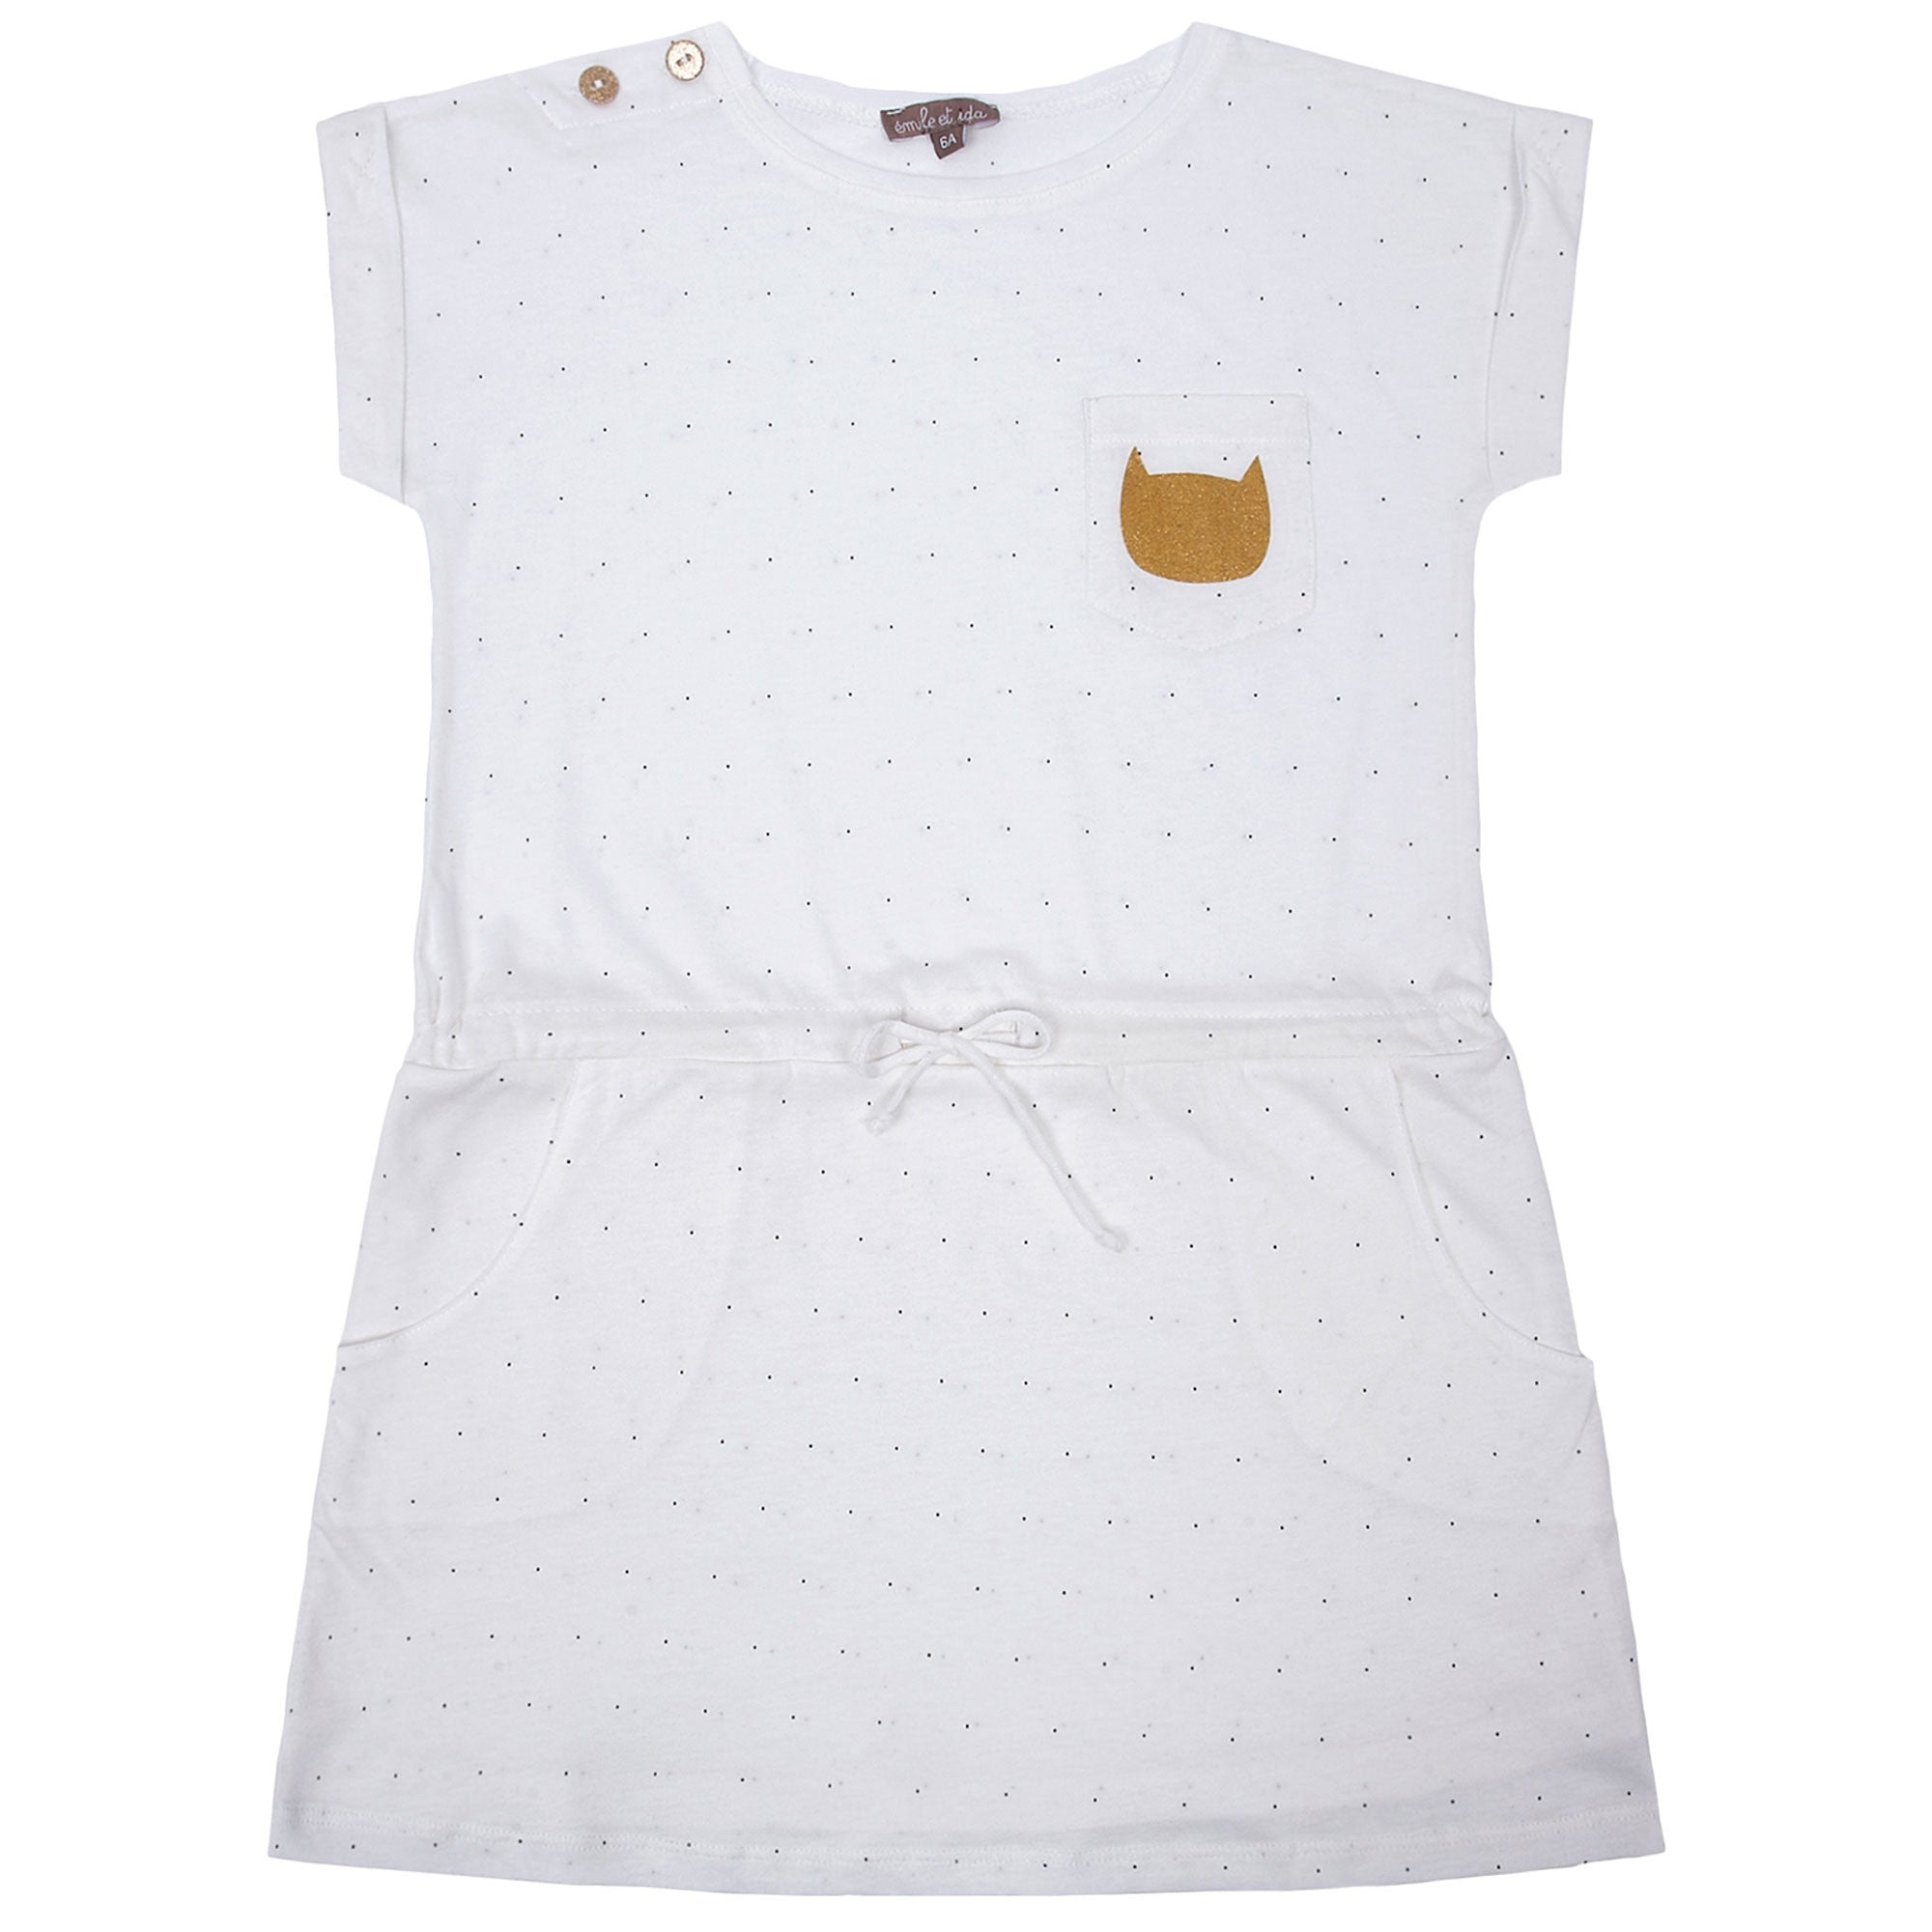 Girls White Cotton Dress With Cat